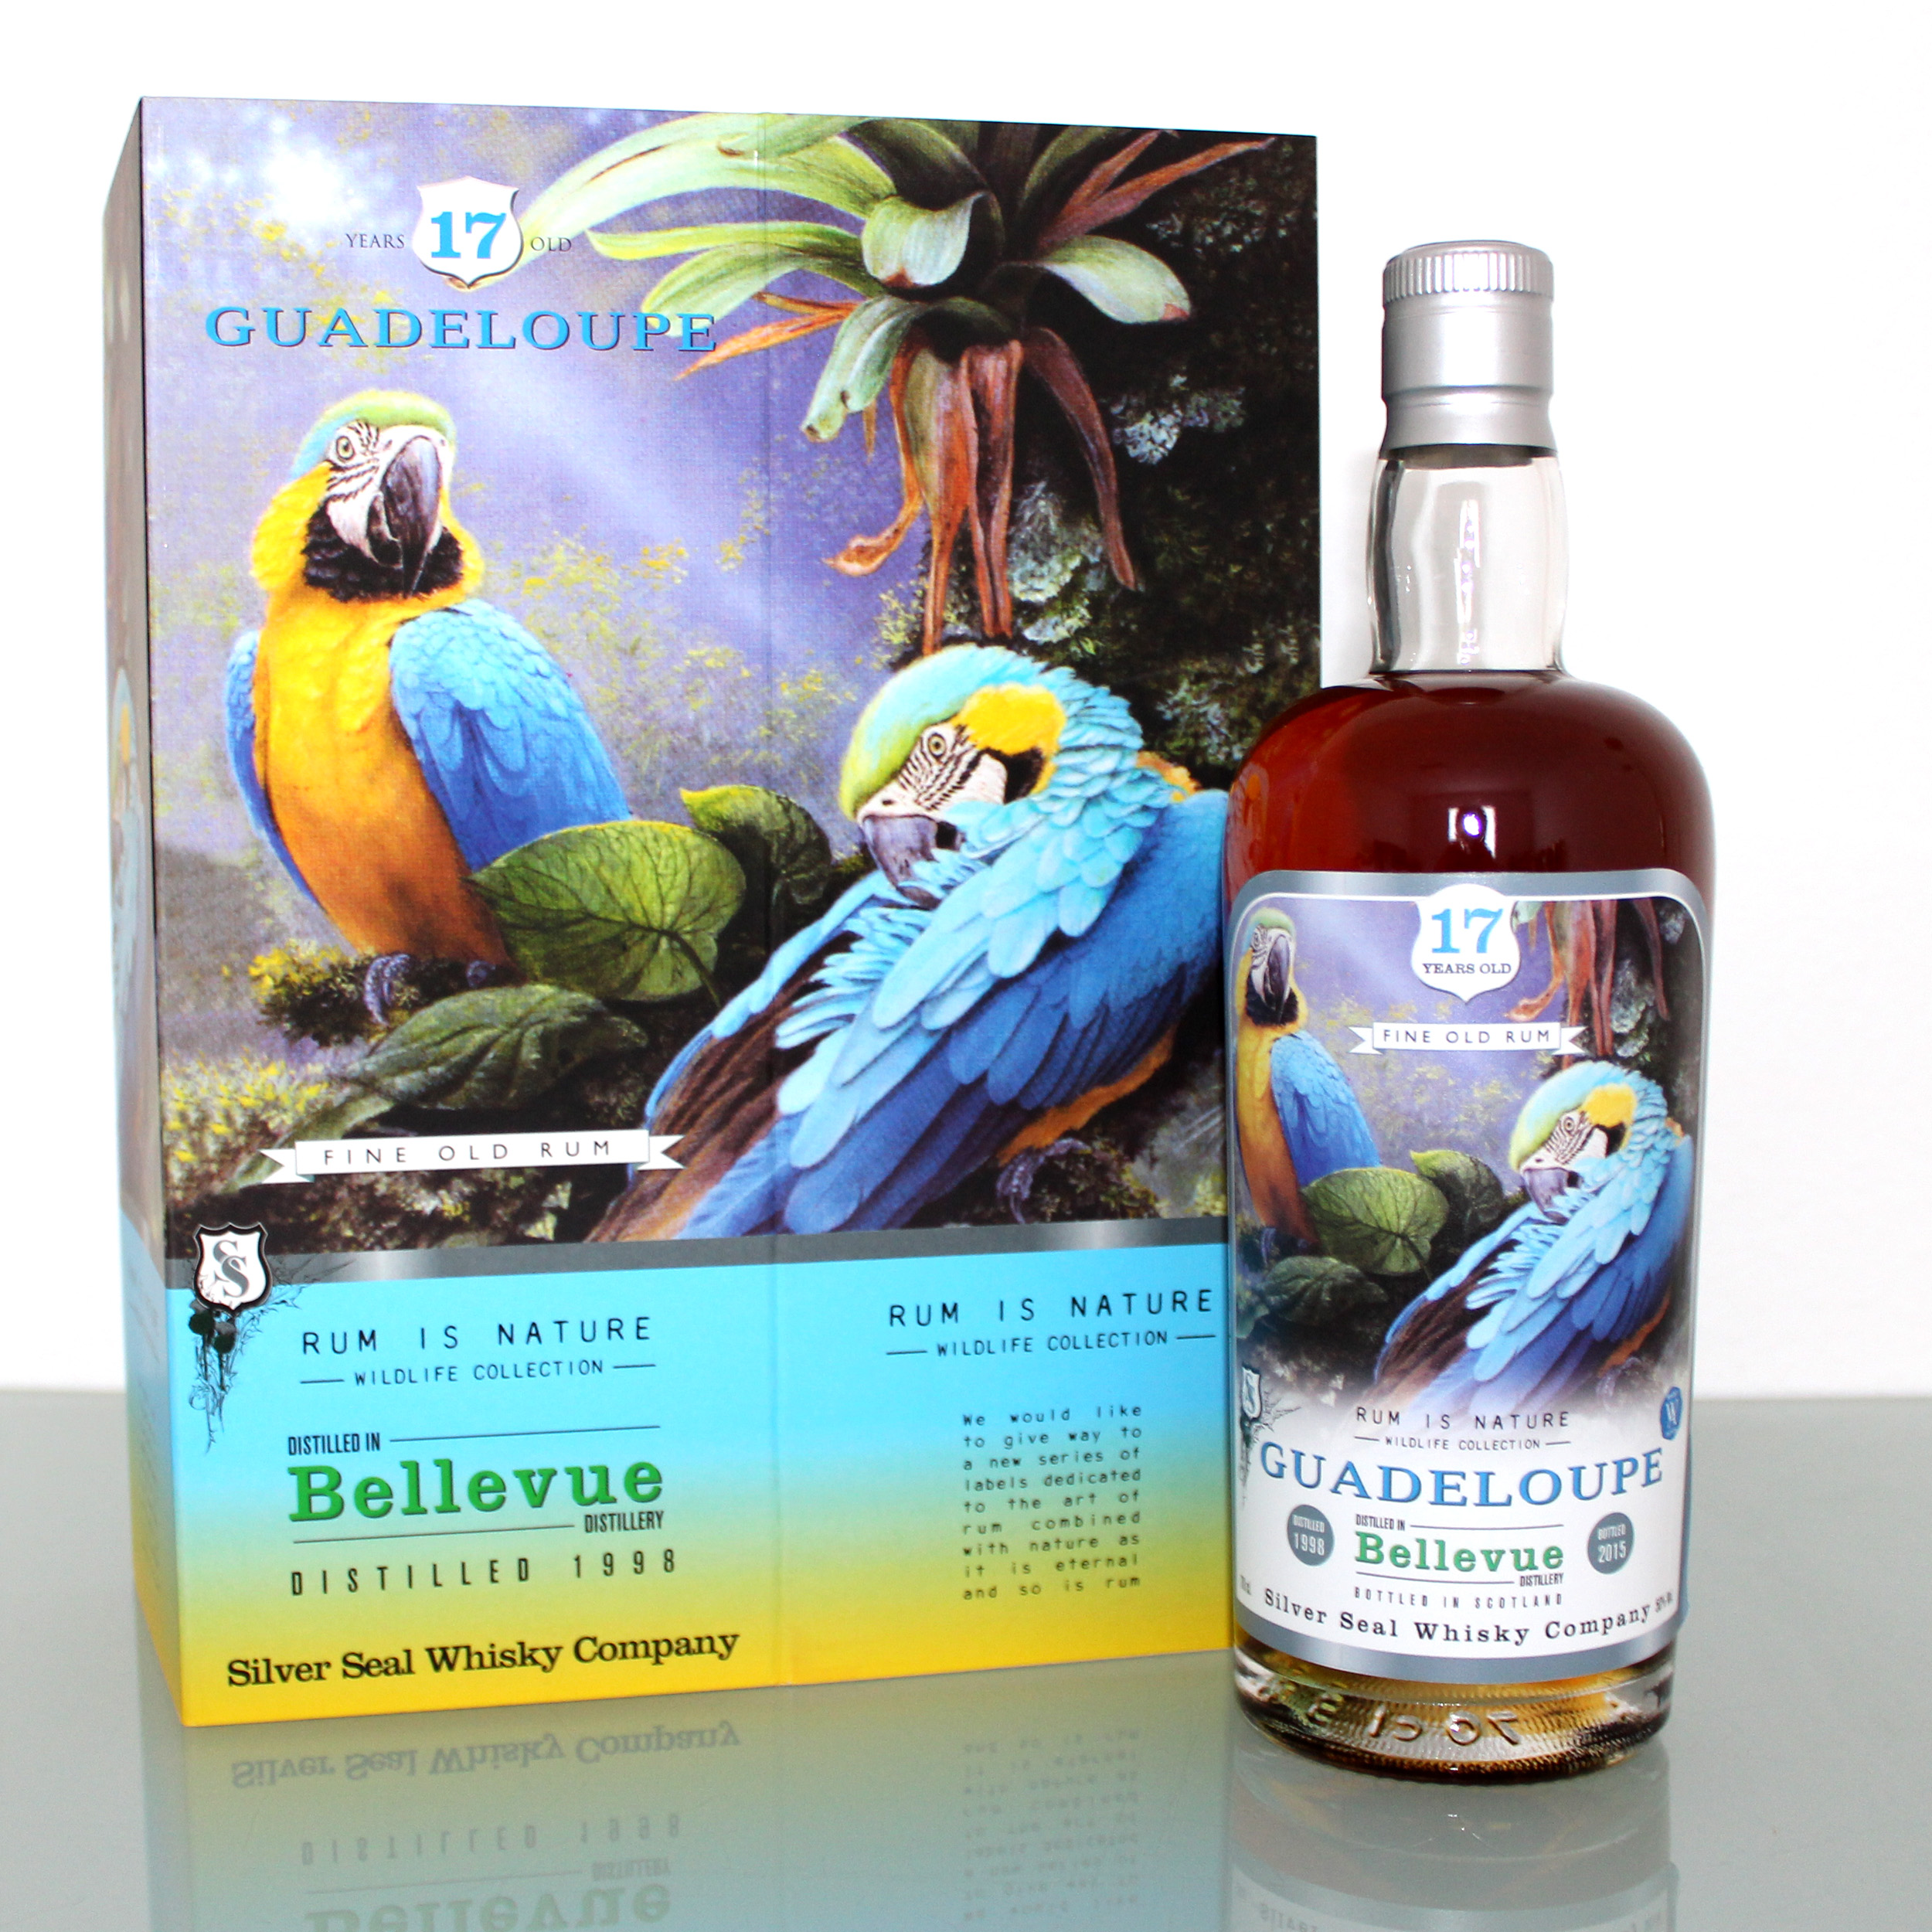 Bellevue Guadeloupe Rum Silver Seal 17 Years Old 1998 Wildlife Collection box